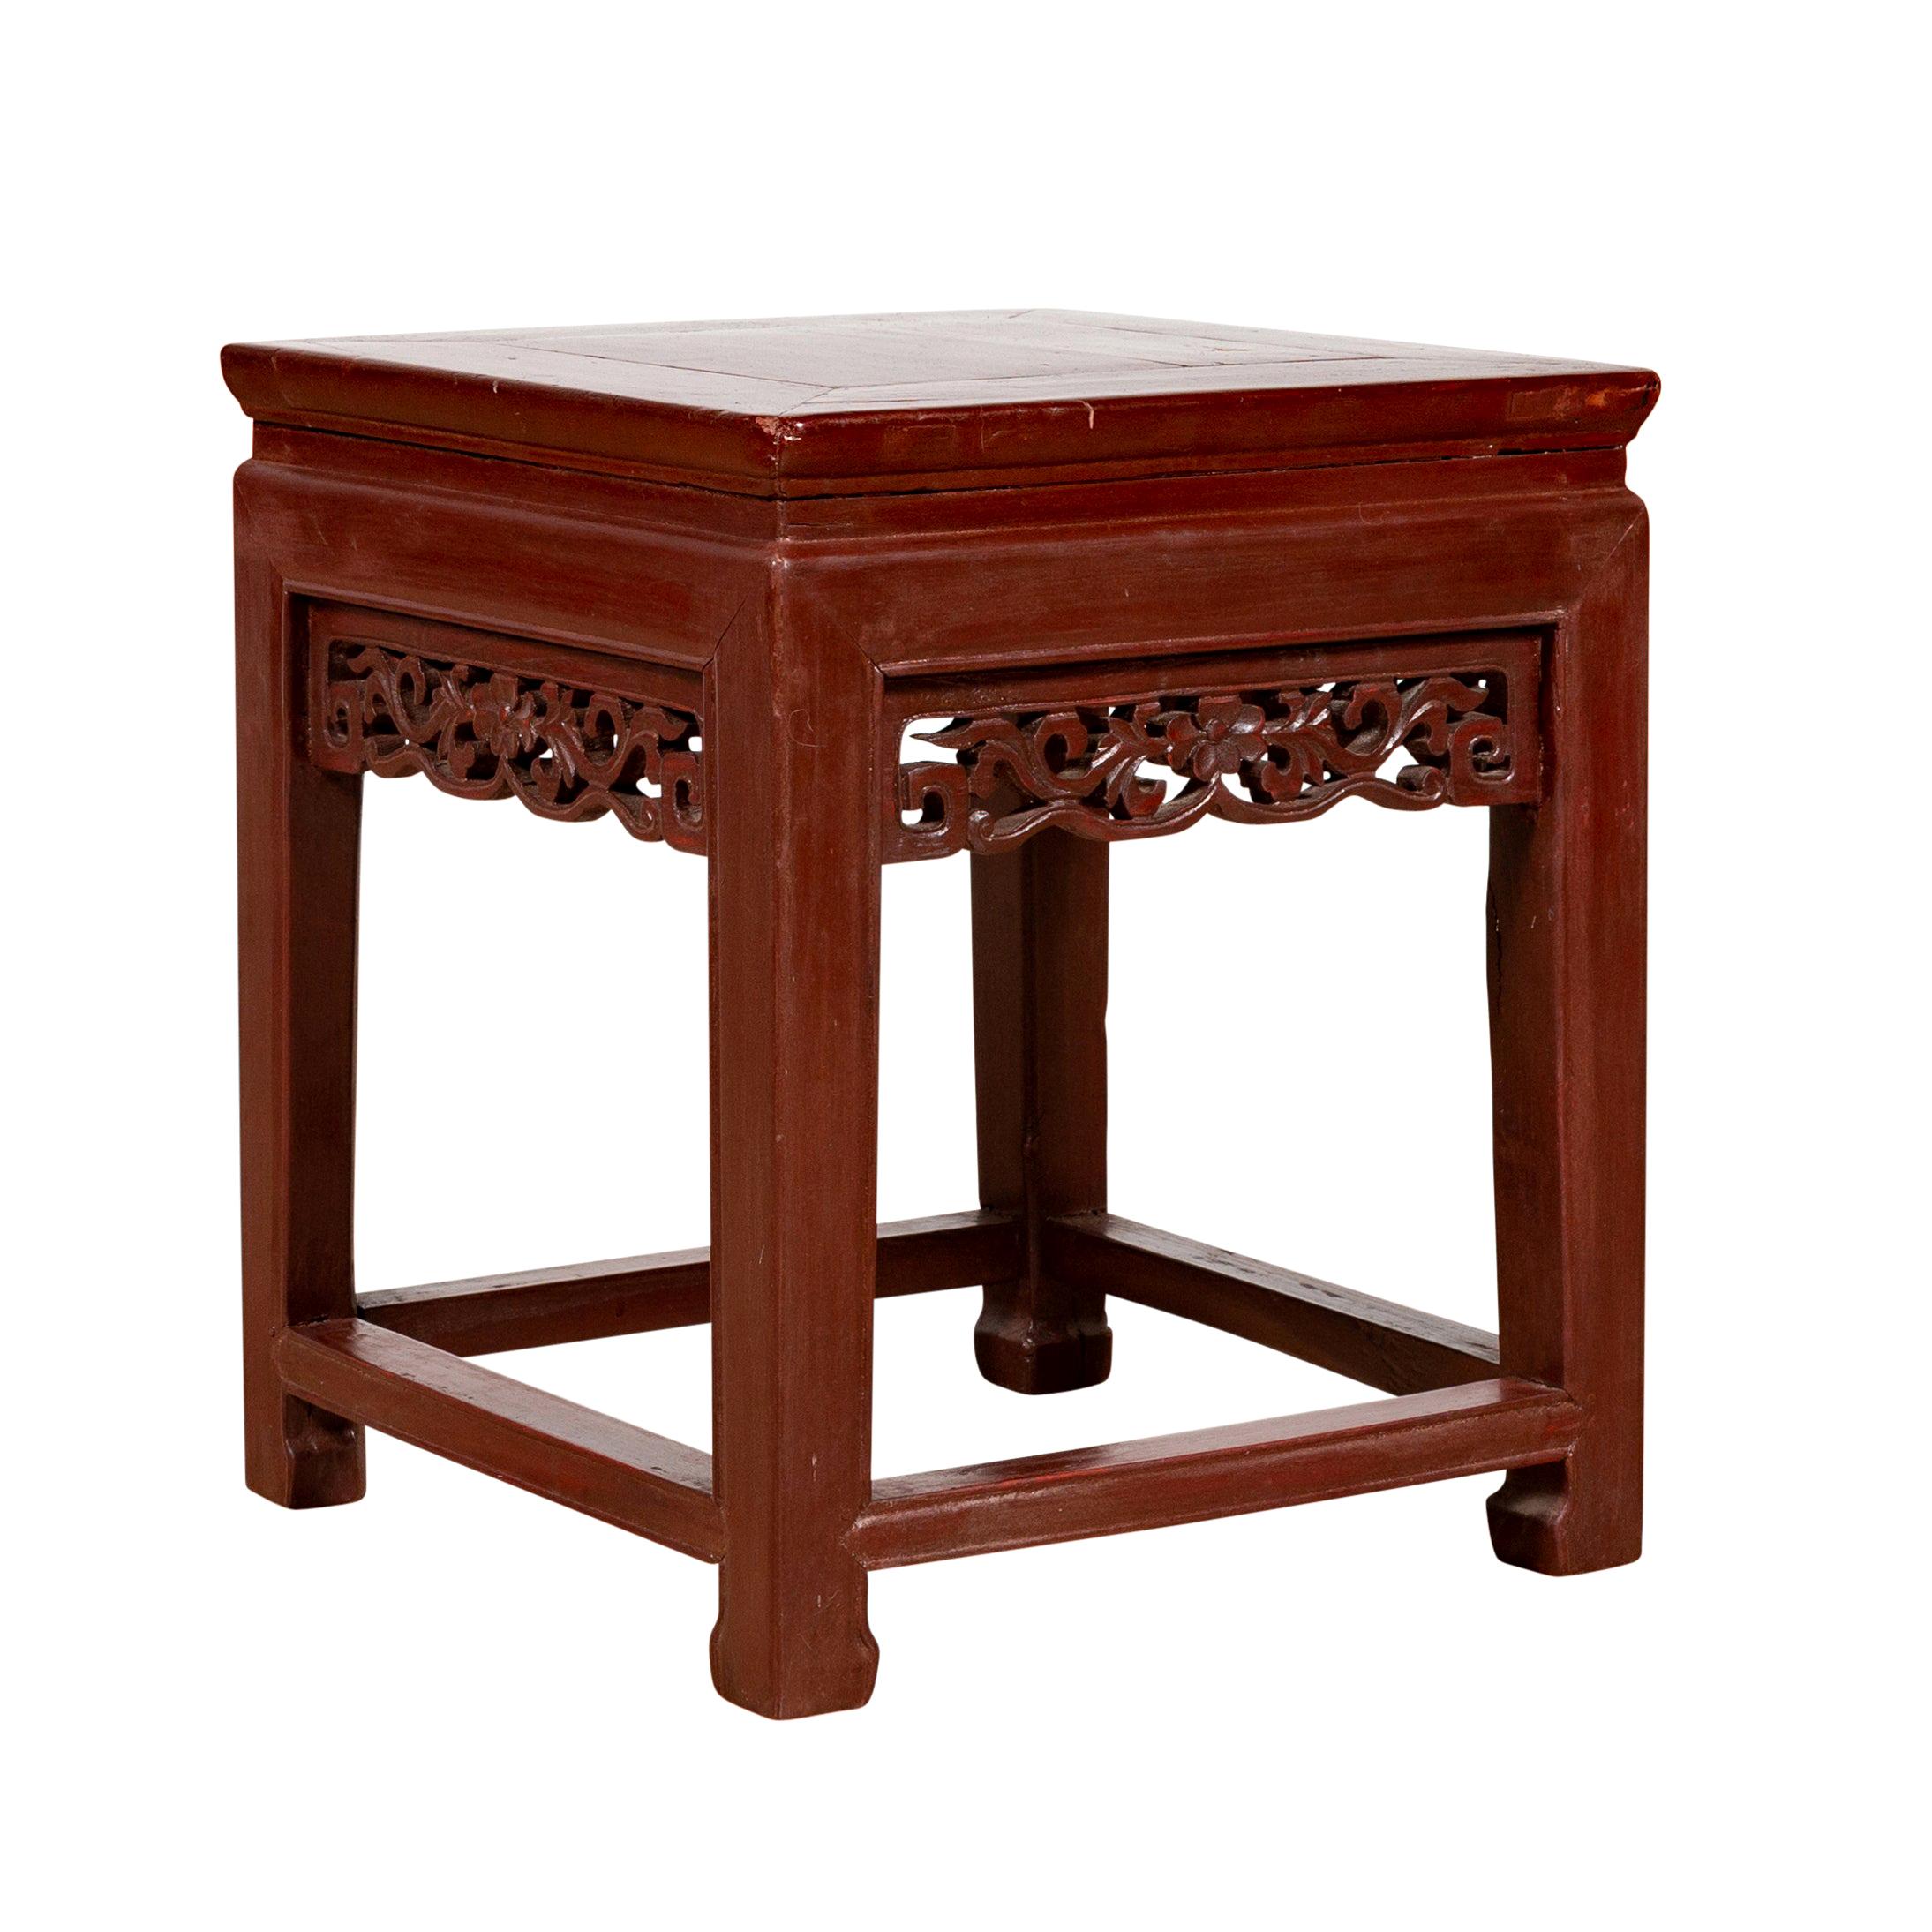 Vintage Chinese Side Table with Dark Red Patina and Foliage Hand Carved Apron For Sale